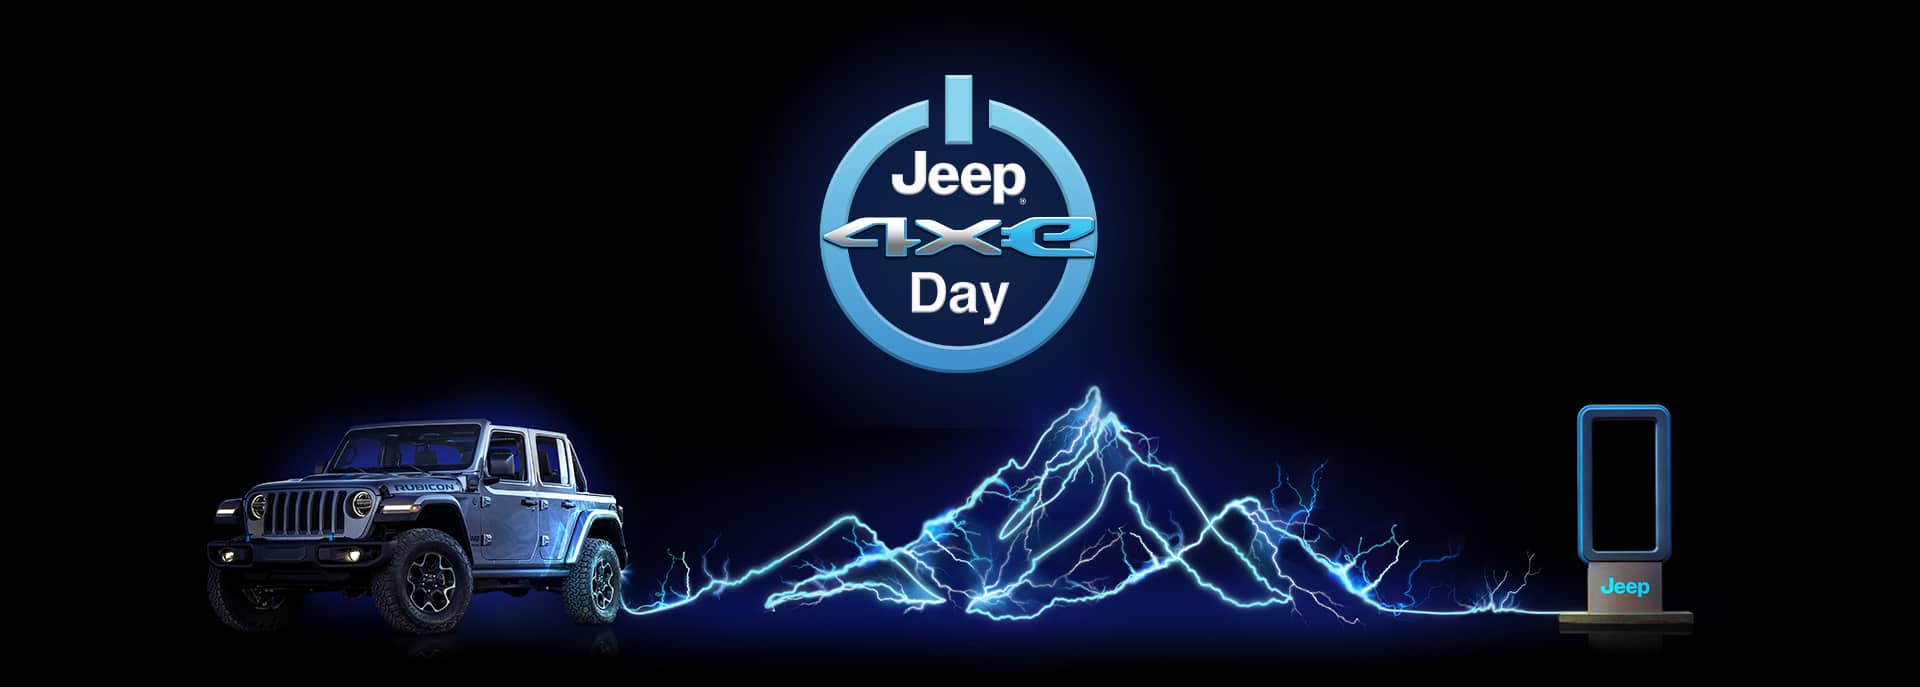 Jeep 4XE Day